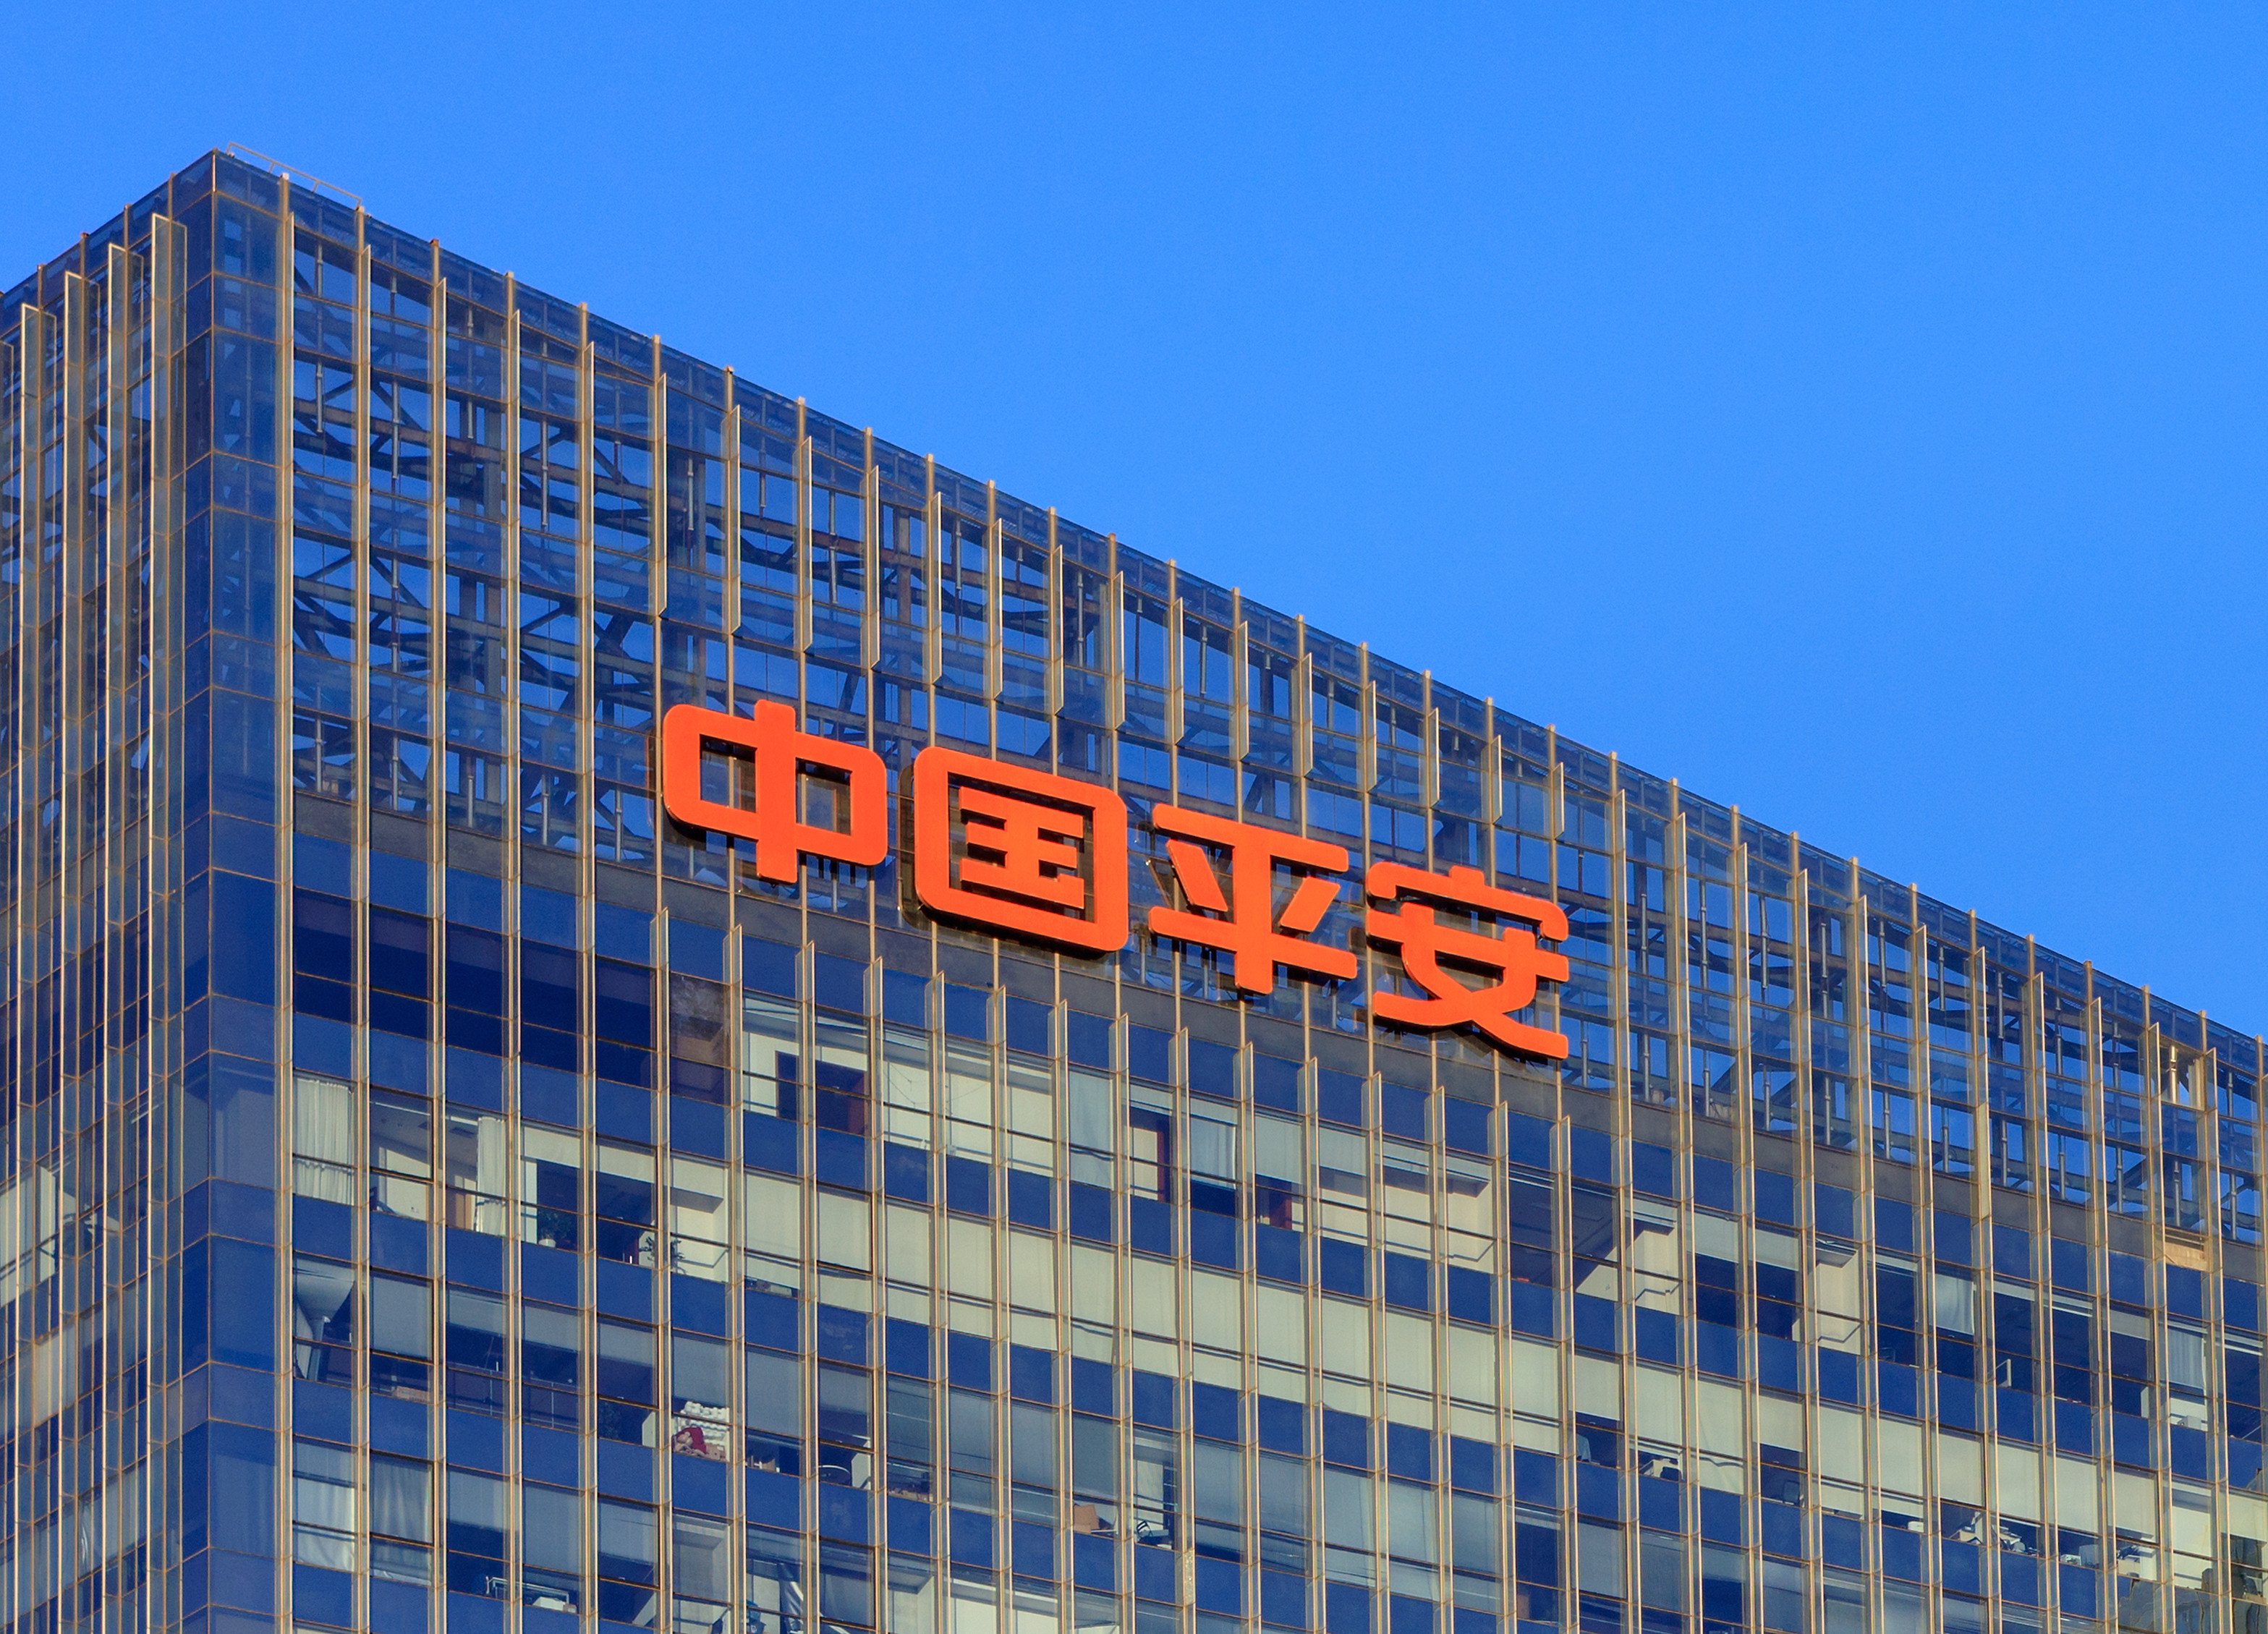 Ping An Insurance’s sign on its building in Beijing. Photo: Shutterstock